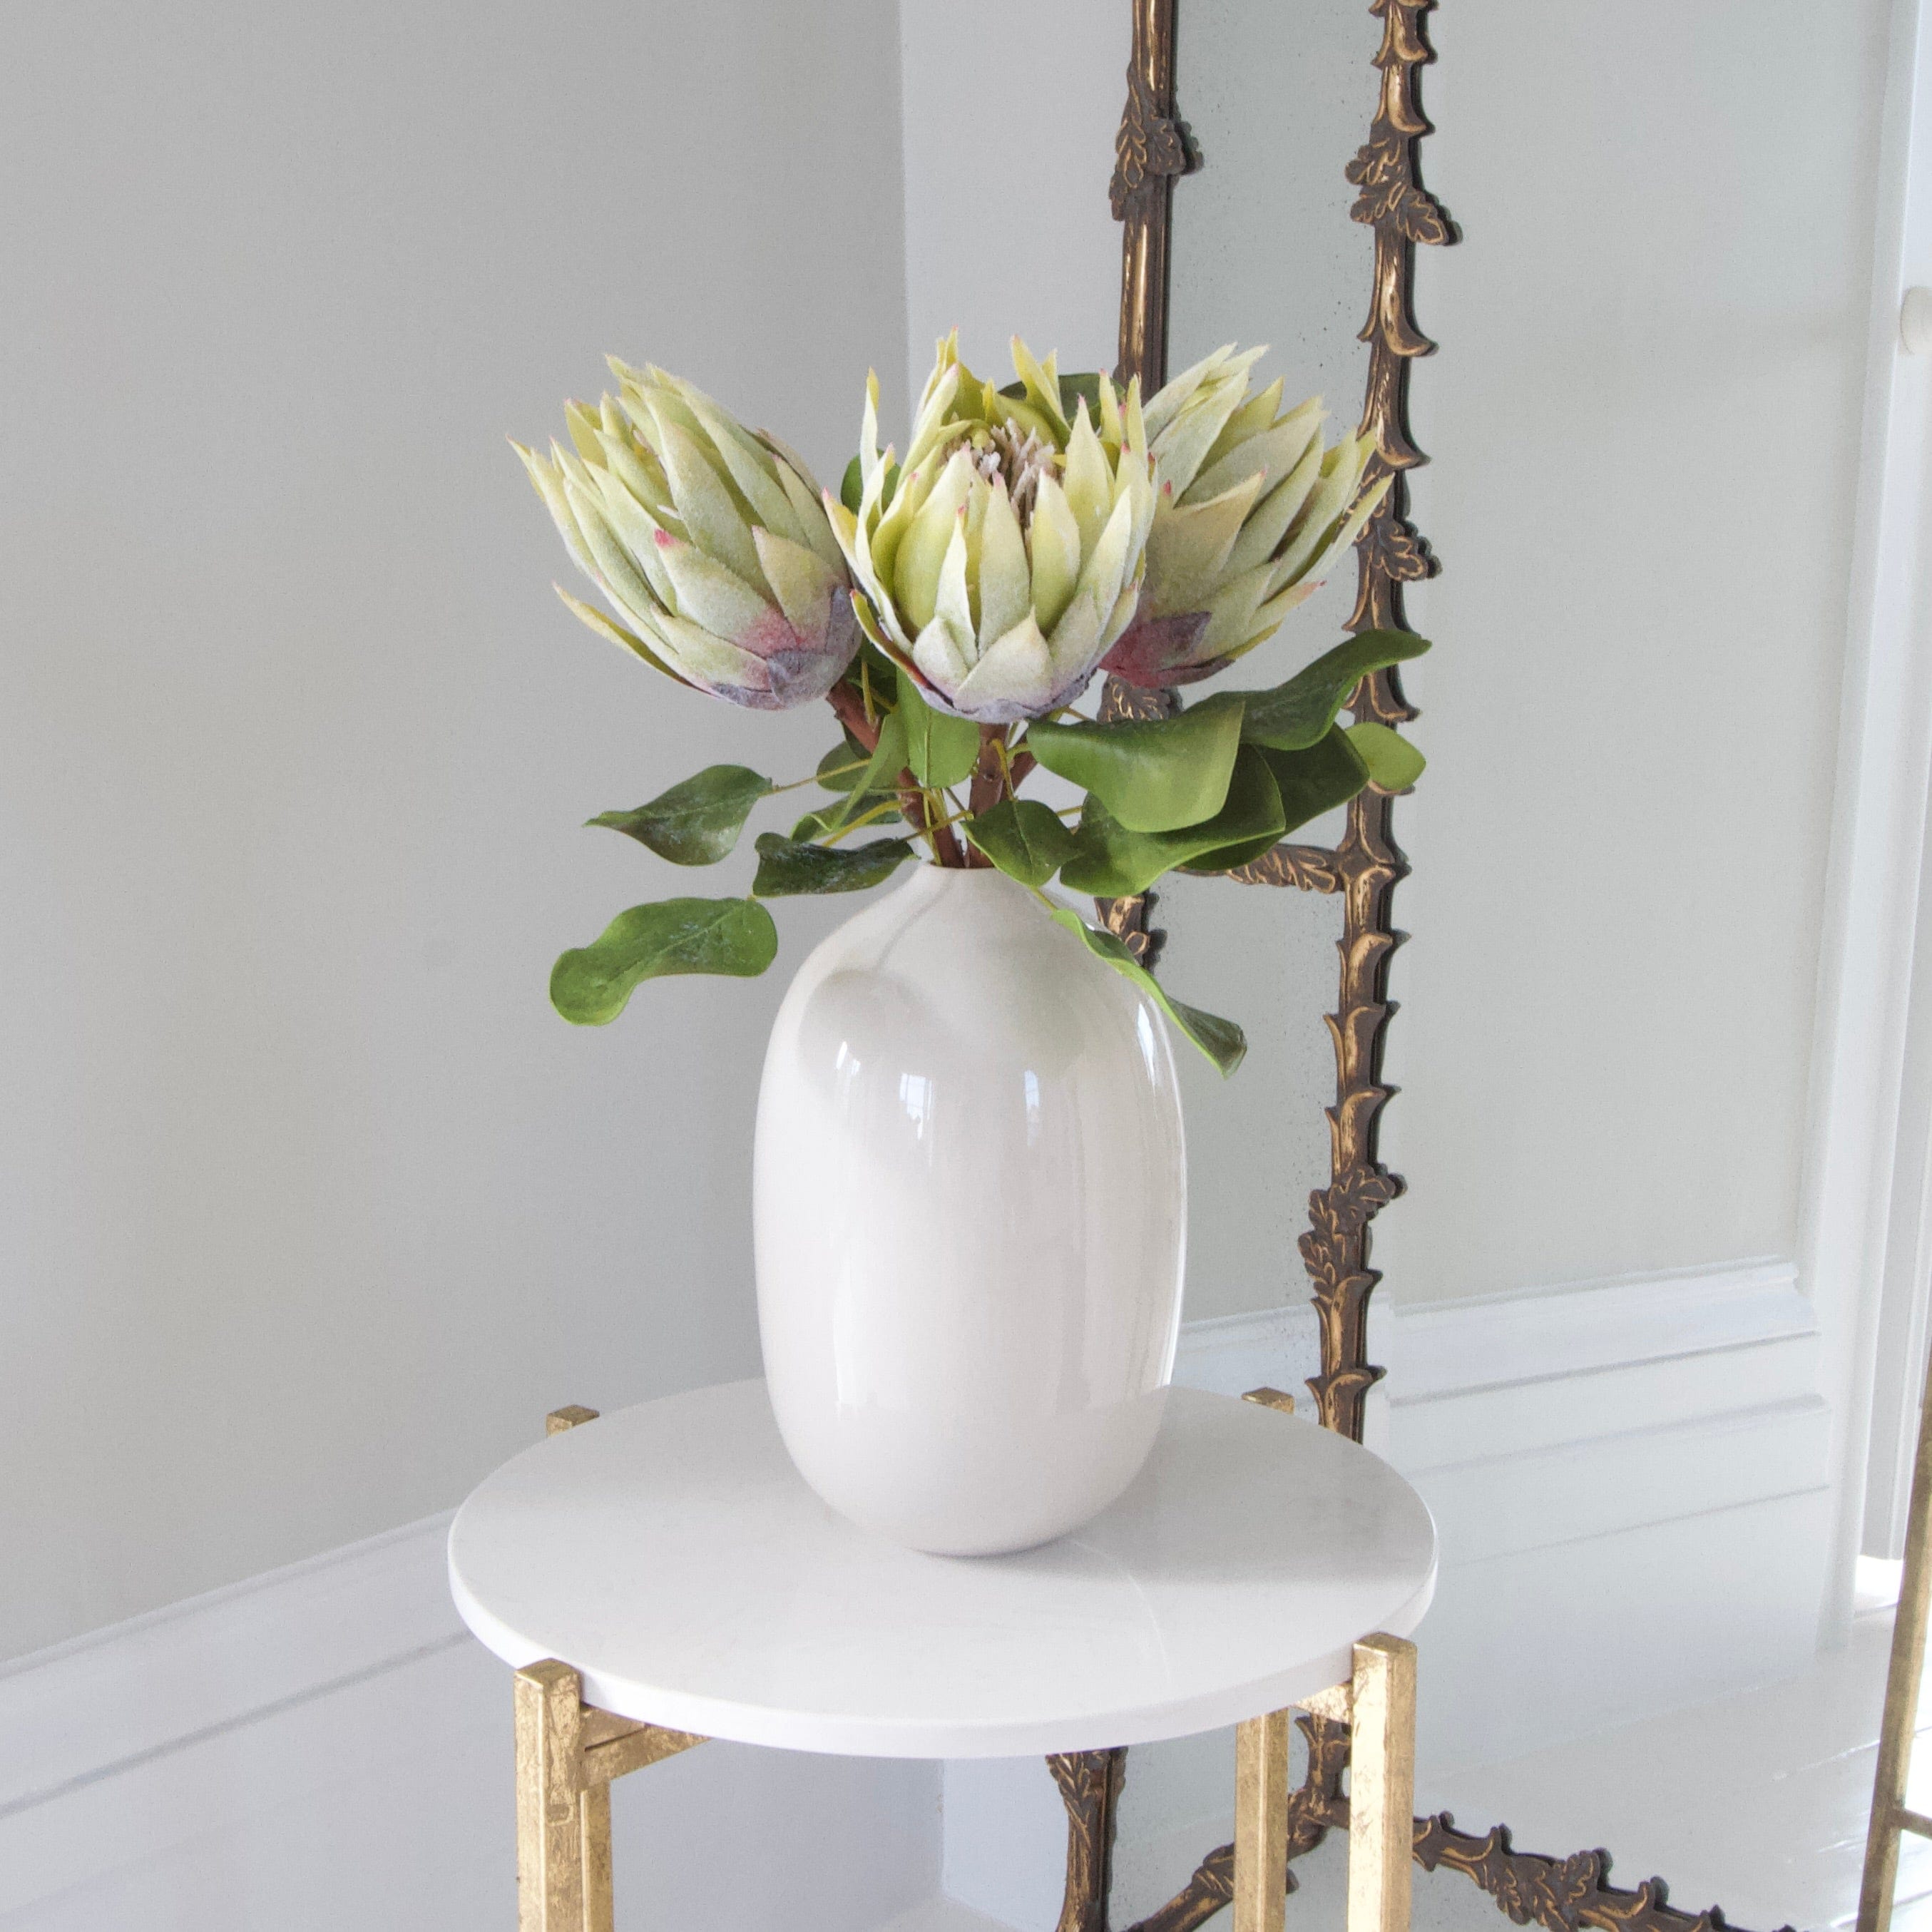 Luxury Lifelike Realistic Artificial Fabric Silk Blooms with Foliage Buy Online from The Faux Flower Company | Green King Proteas ABY7018GR White Gloss Ceramic Broadway Vase ABP1699